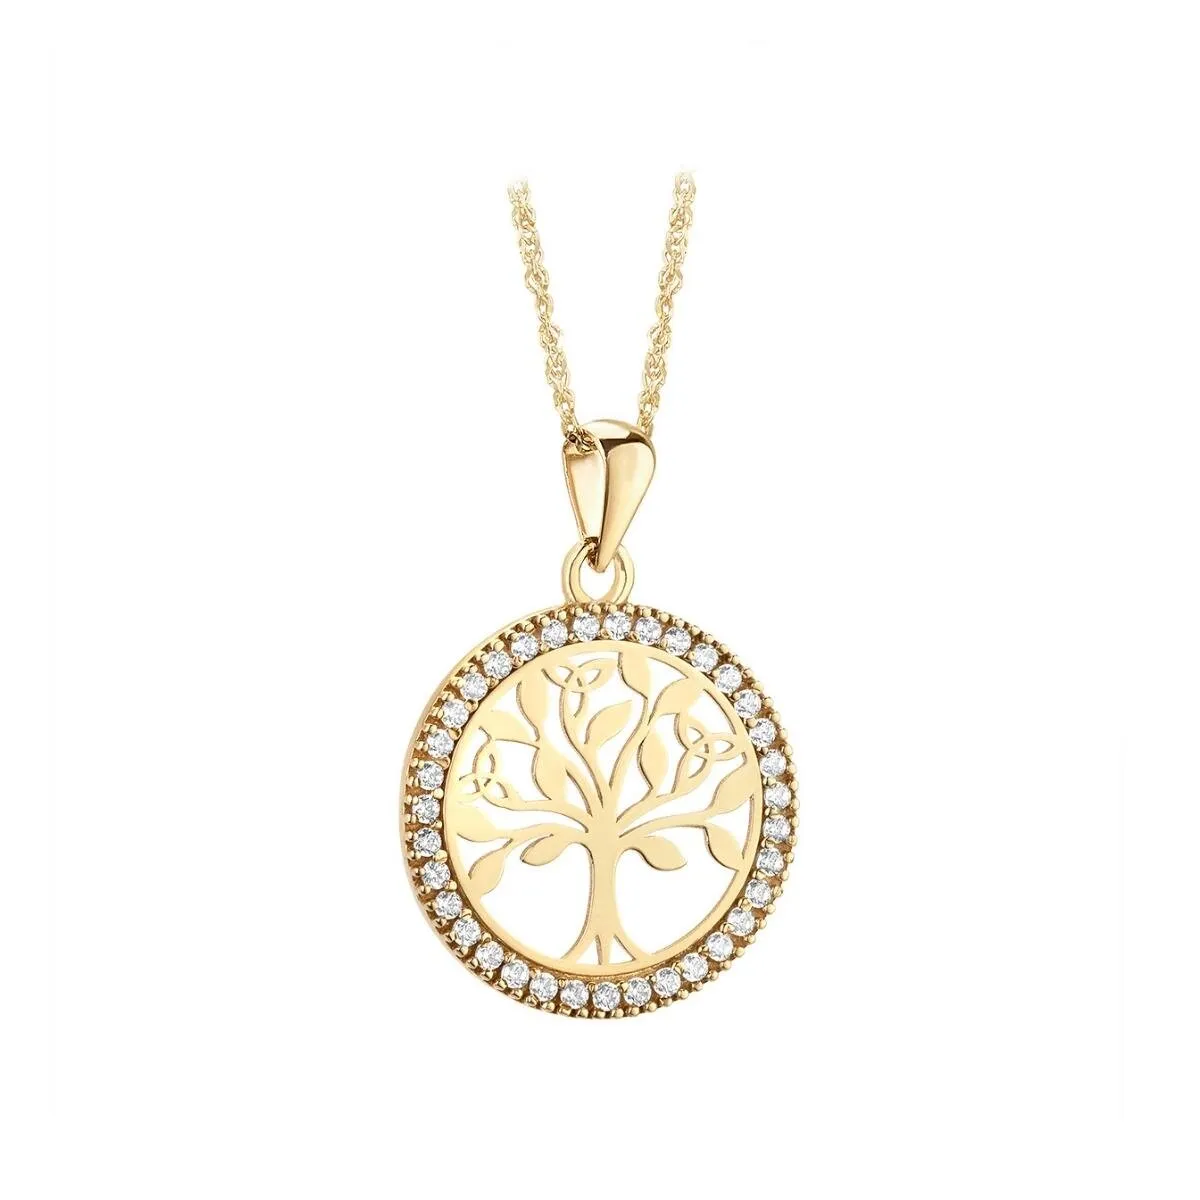 10k Gold Tree Of Life Necklace with Cubic Zirconia Stones